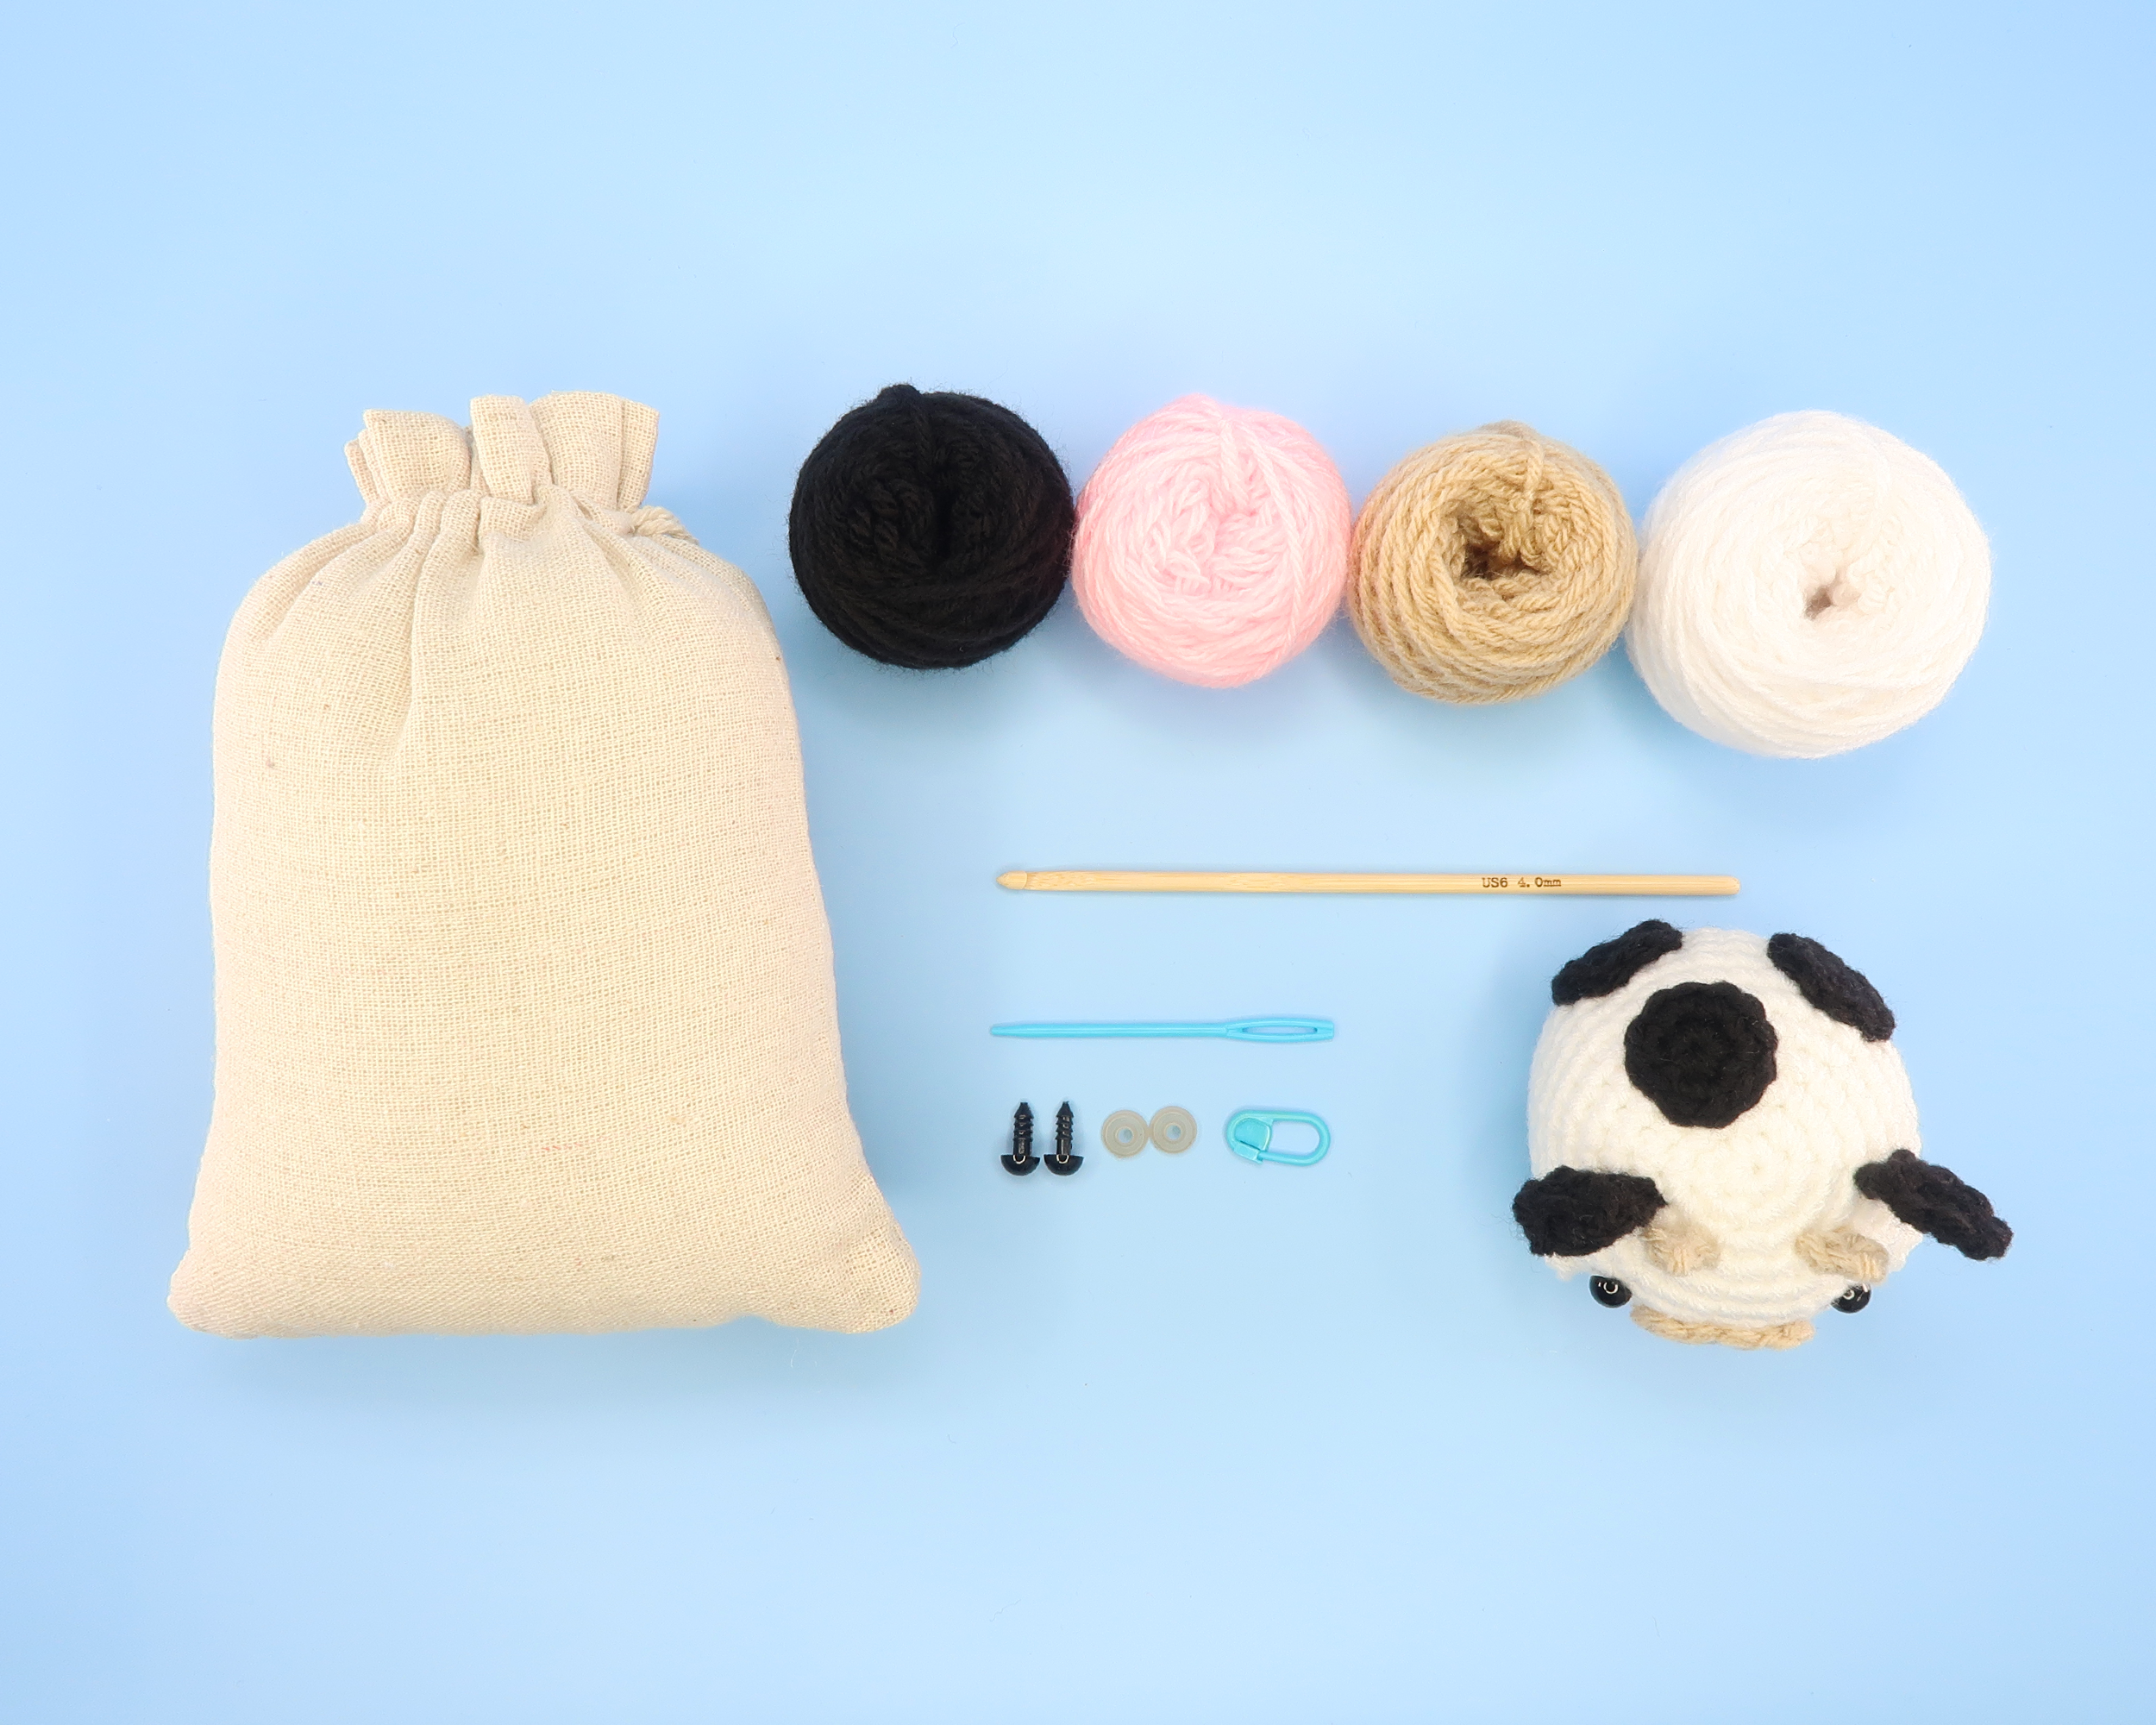 Cow Craft Kit  Cow Crochet Kit - Intermediate Skill Level - Makes One Cow  8.5 x 7 x 4in. (nmnccrchktcow) 